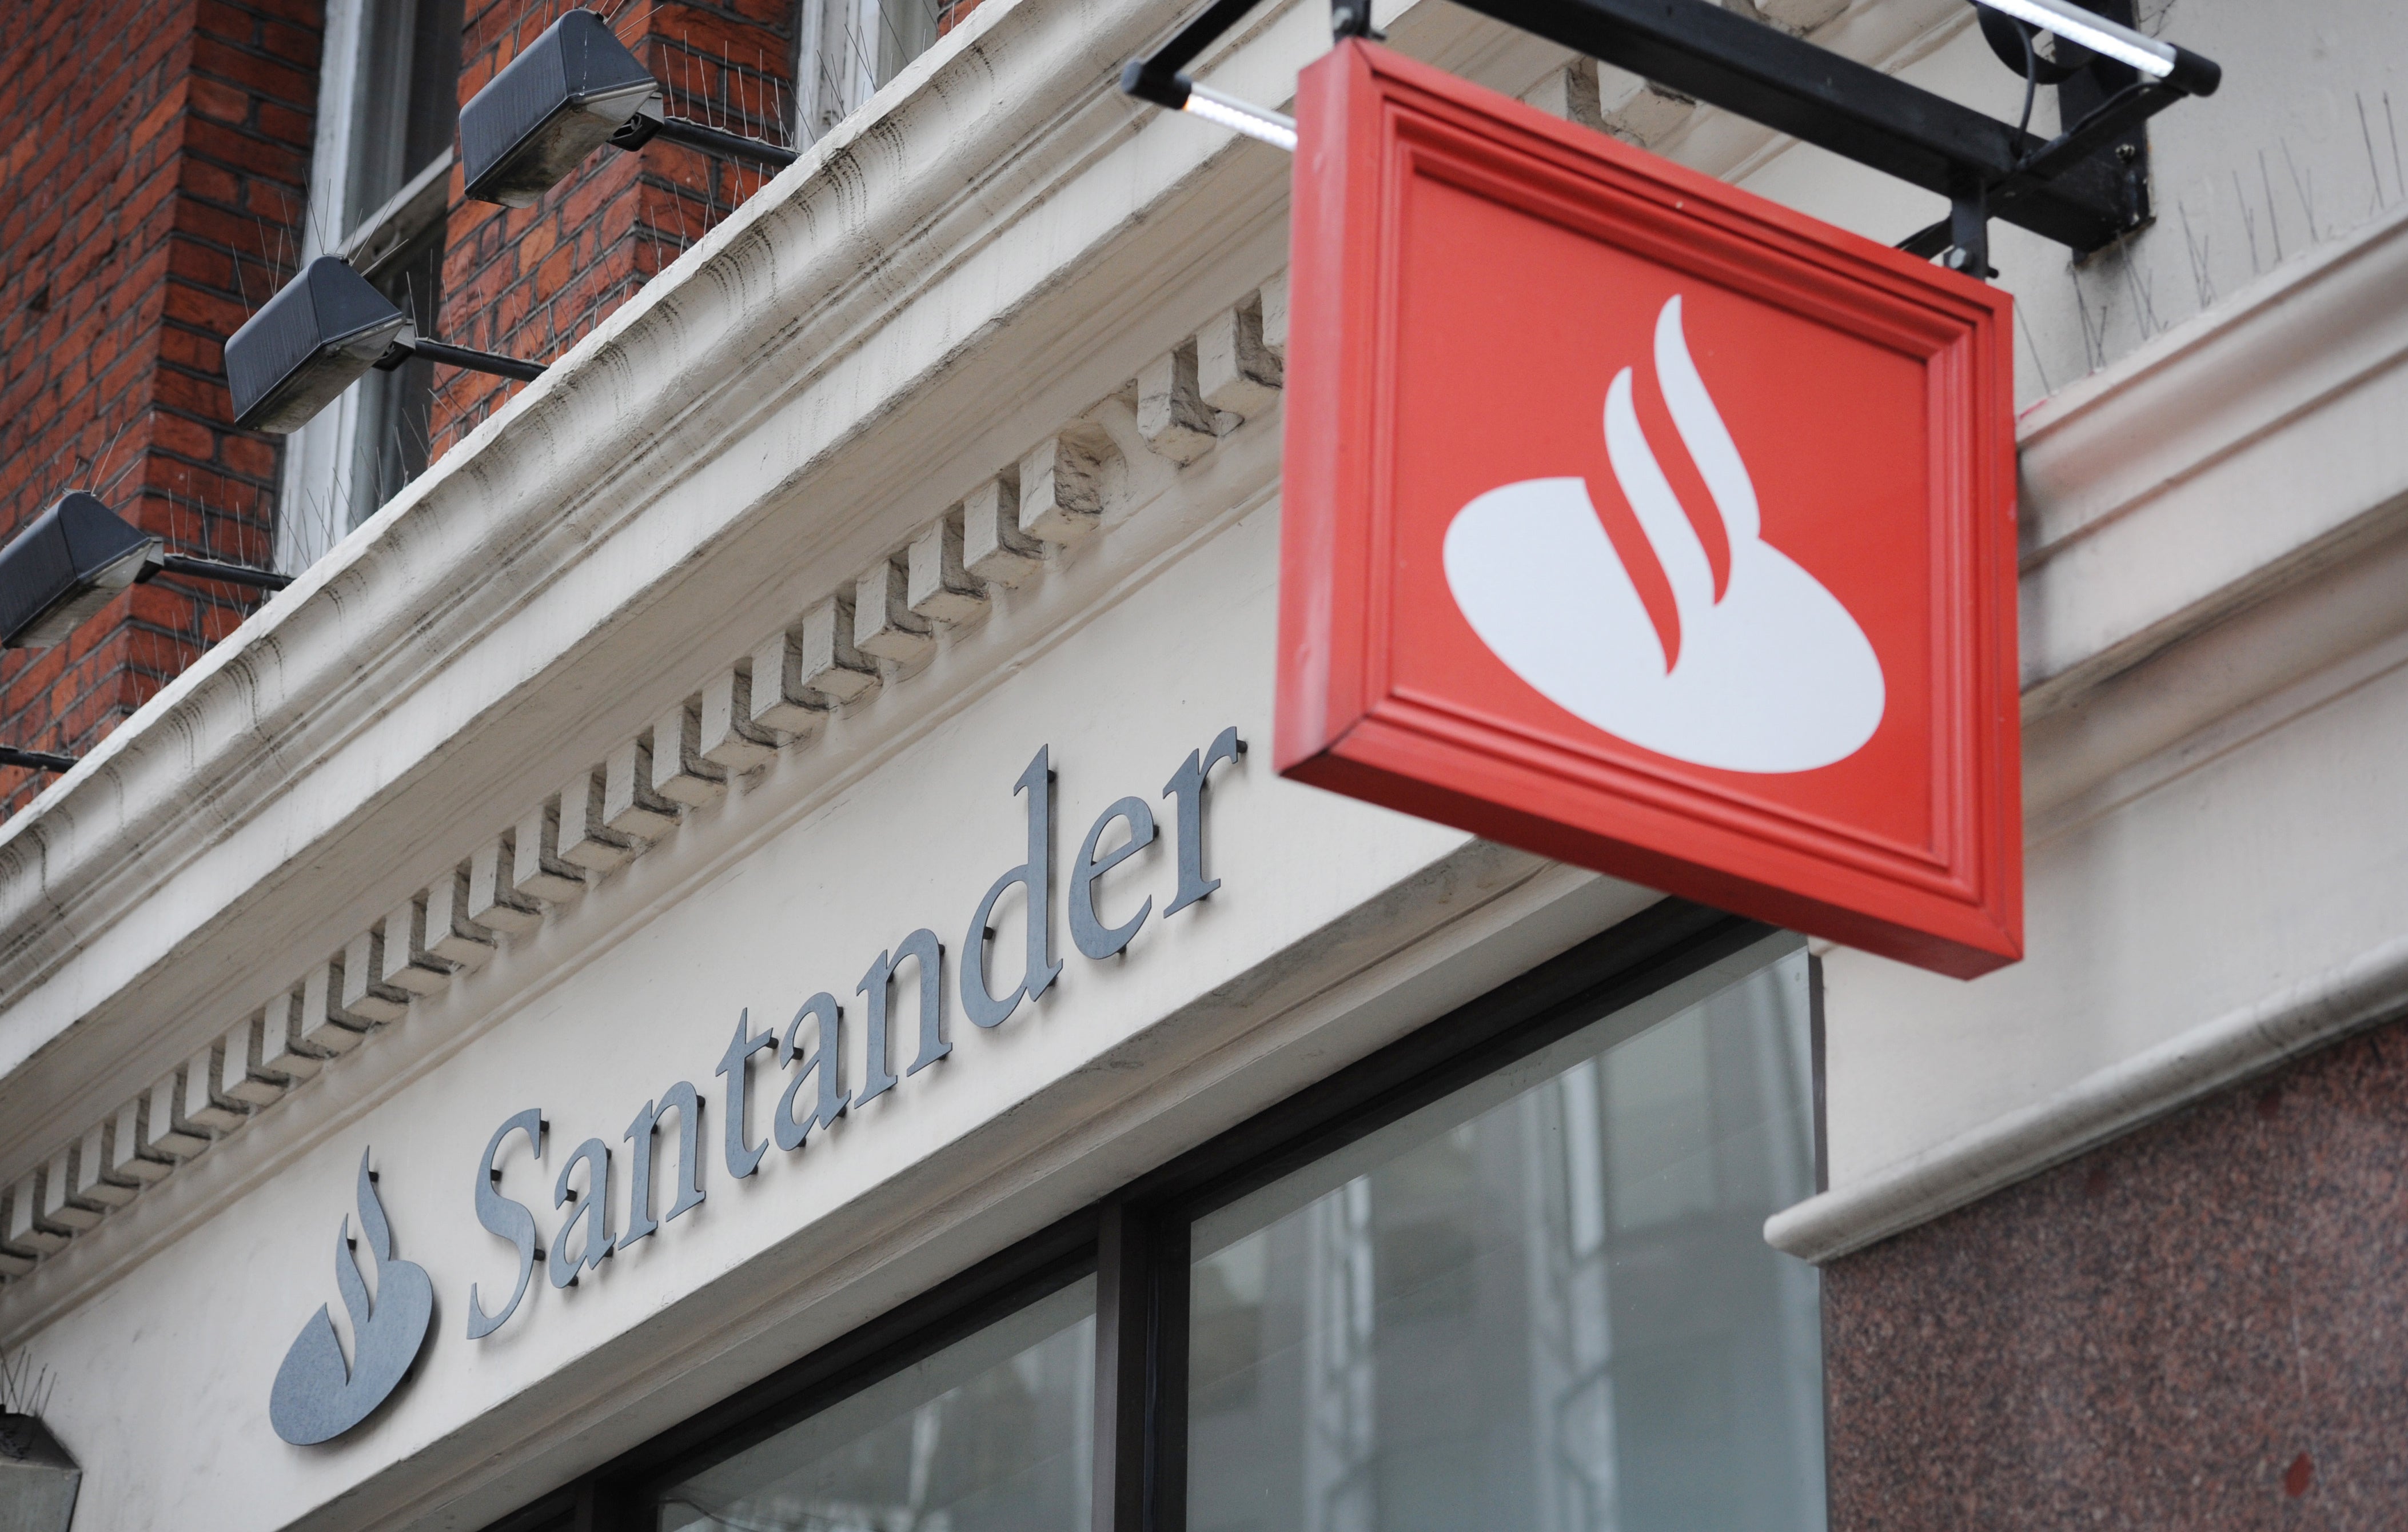 Most Santander bank branches will operate reduced hours from mid-July (PA)